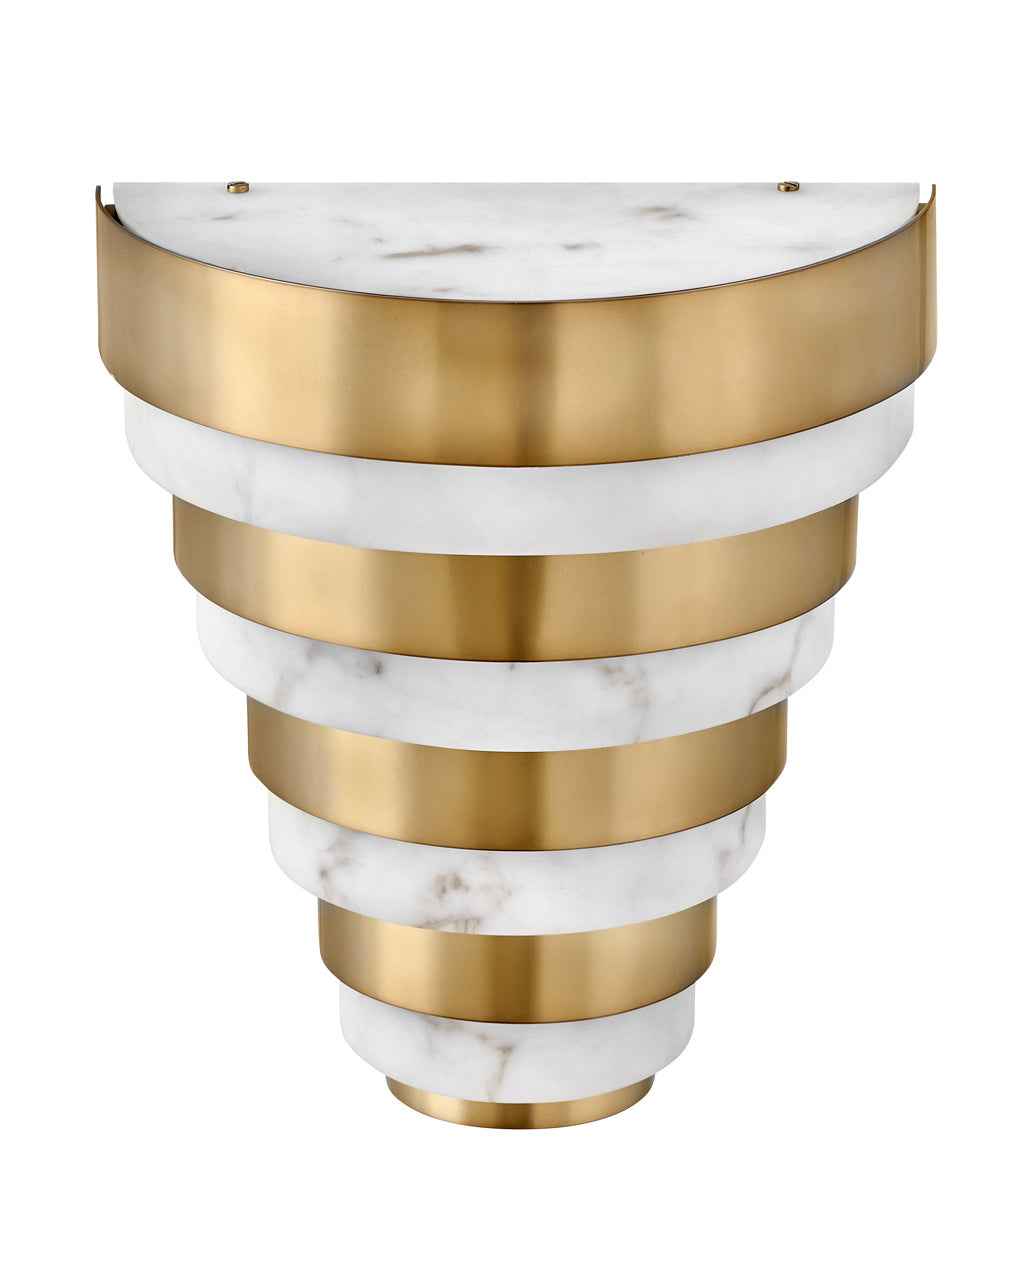 Echelon LED Wall Sconce in Heritage Brass by Hinkley Lighting